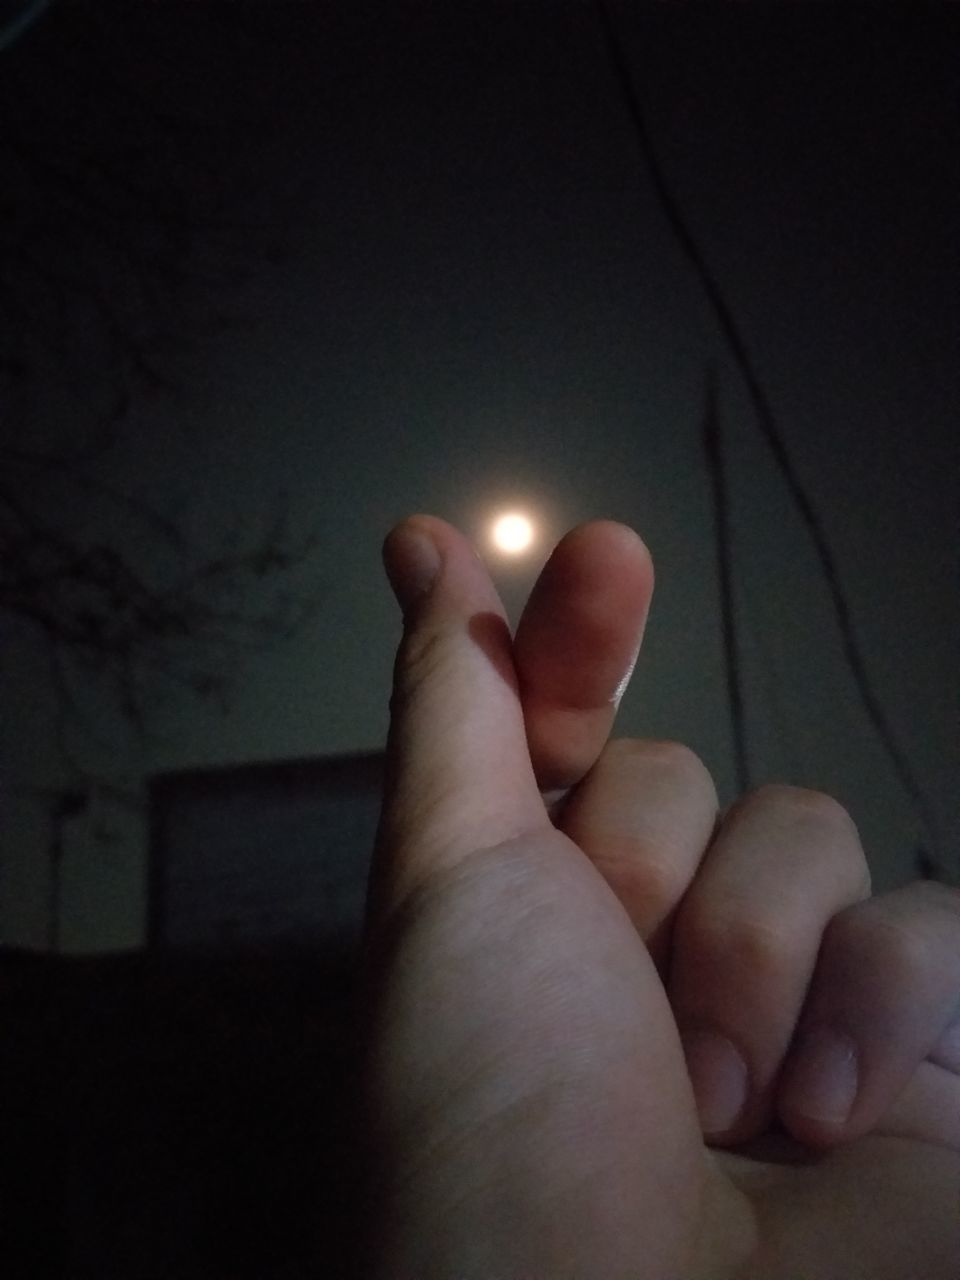 CLOSE-UP OF PERSON HAND HOLDING ILLUMINATED LAMP